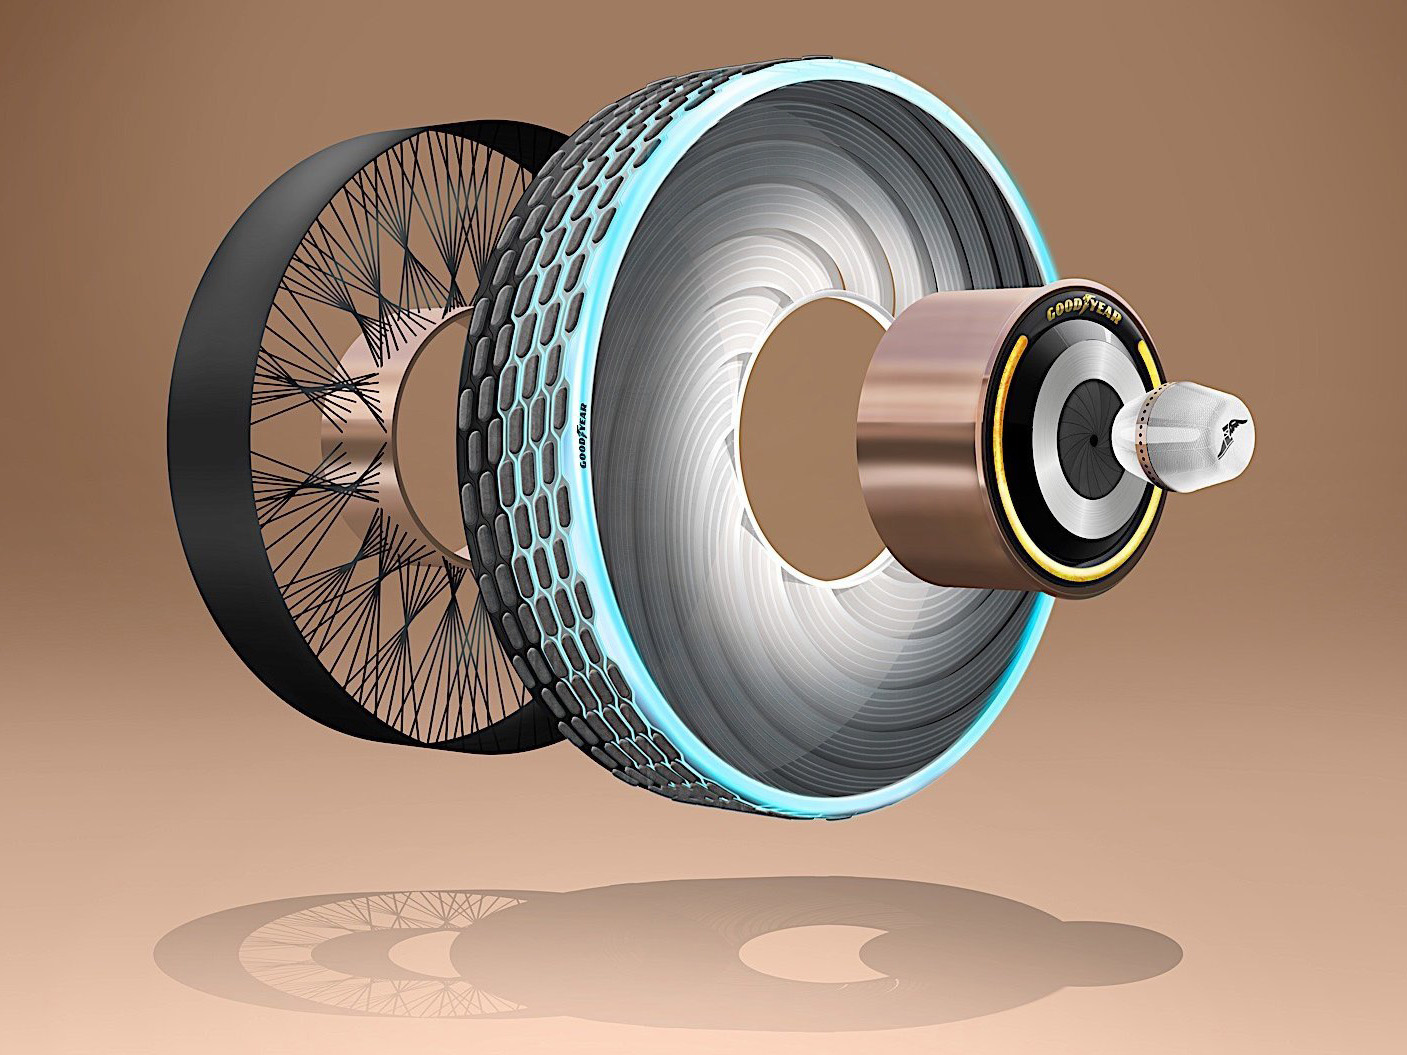 Goodyear has created a new tire concept that retreads from the inside.